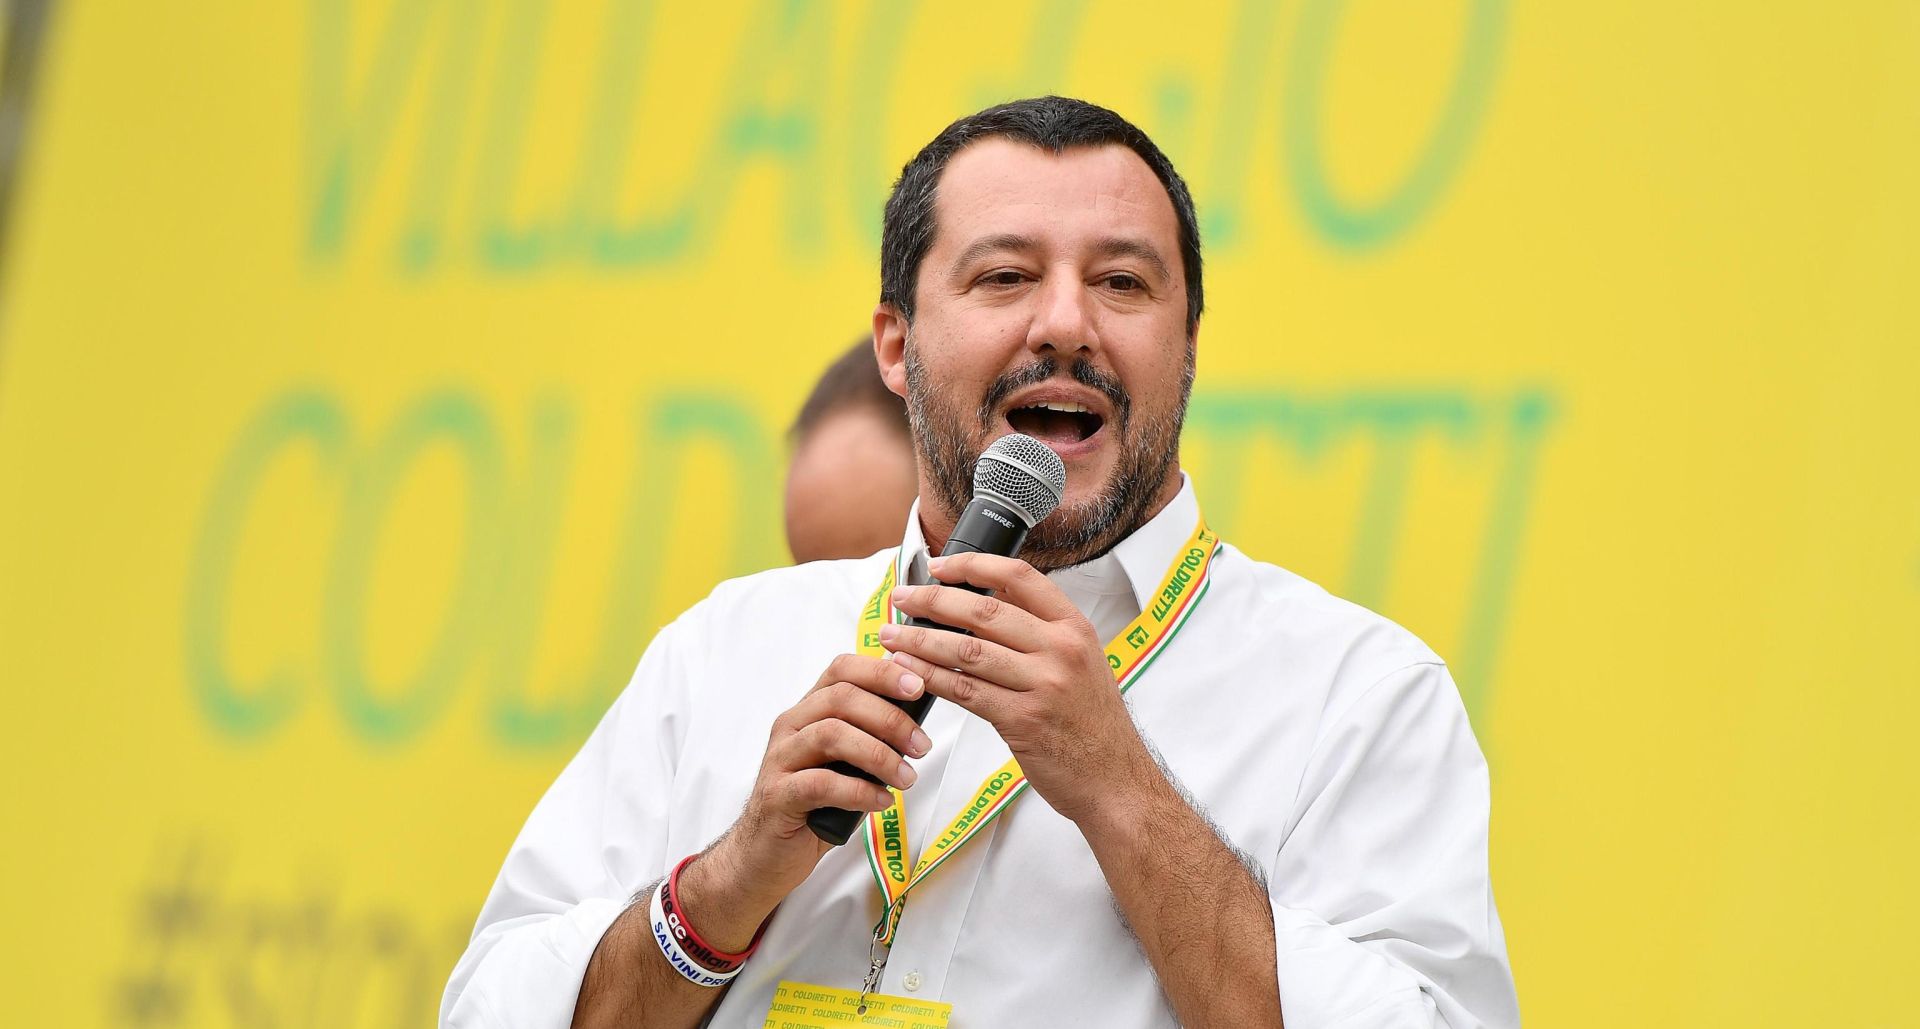 epa07071781 Italian Interior Minister and Deputy Premier Matteo Salvini speaks as he visits a Coldiretti Italian farmers' association event at Circus Maximus in Rome, Italy, 05 October 2018. Matteo Salvini on 05 October blasted European Commission President Jean-Claude Juncker and Economic Affairs Commissioner Pierre Moscovici after they criticised the Italian government's budget plans.  EPA/ETTORE FERRARI